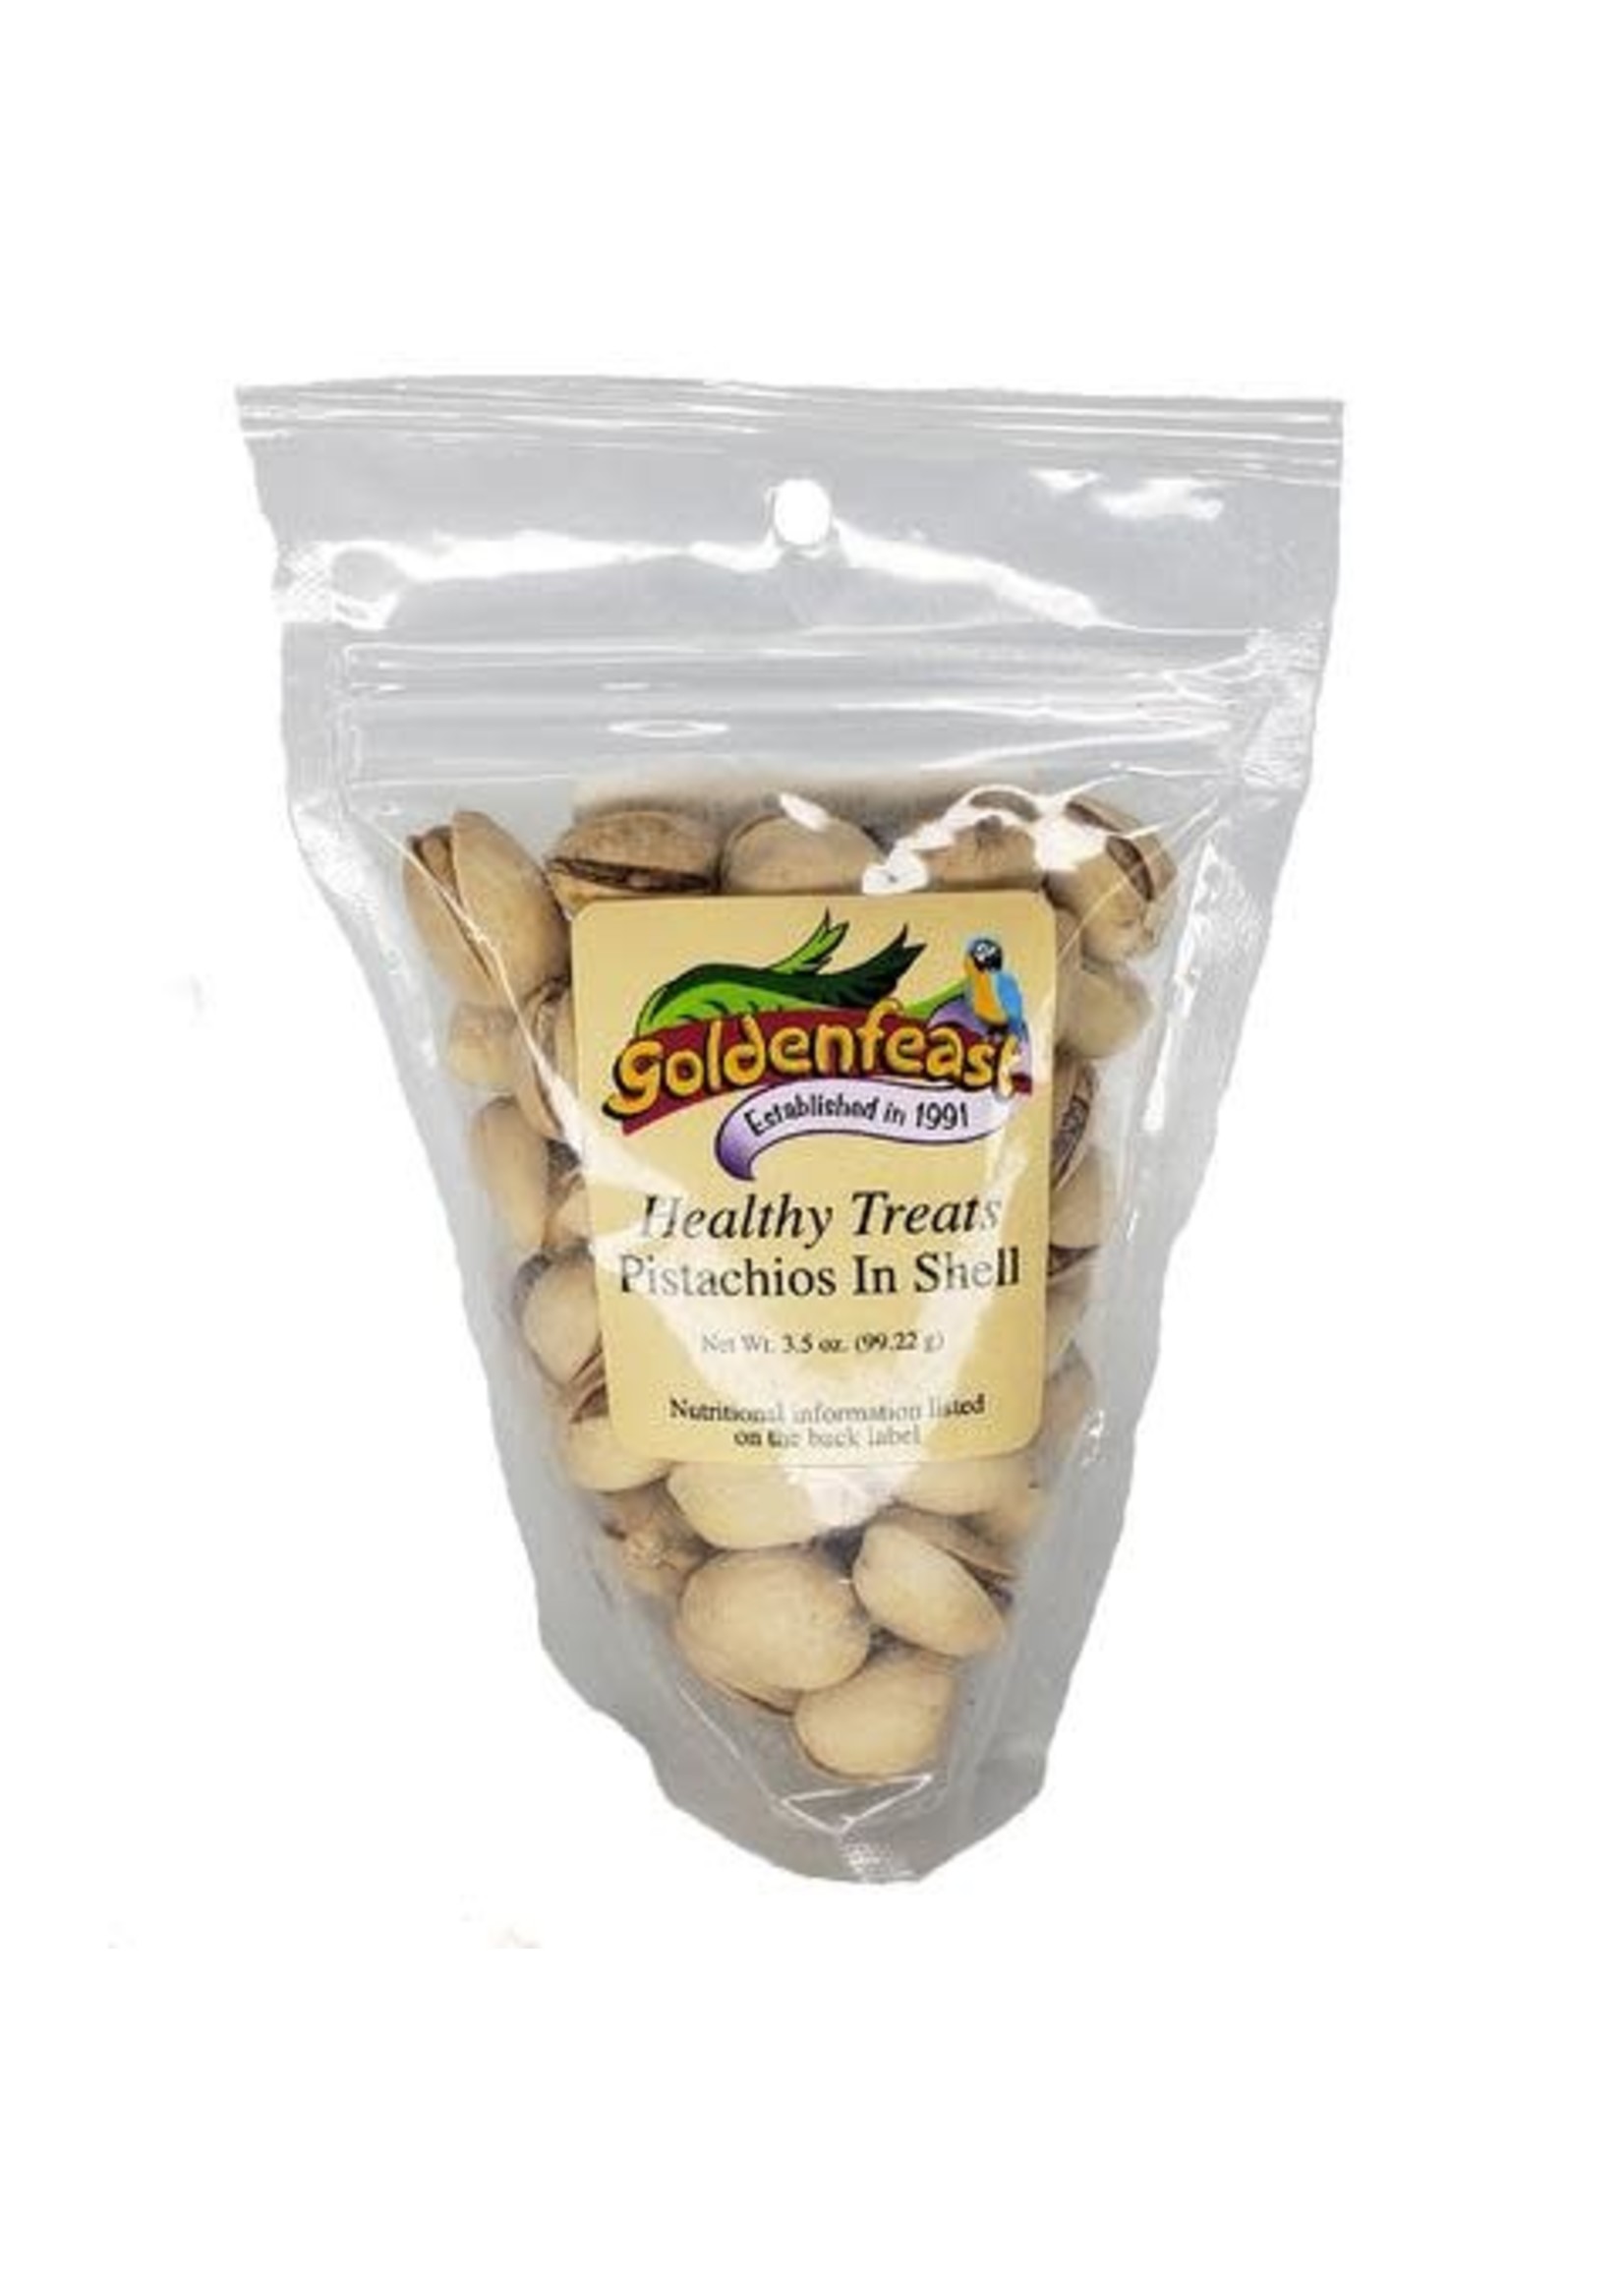 Goldenfeast Goldenfeast Healthy Treats Pistachios In Shell (3.5oz)